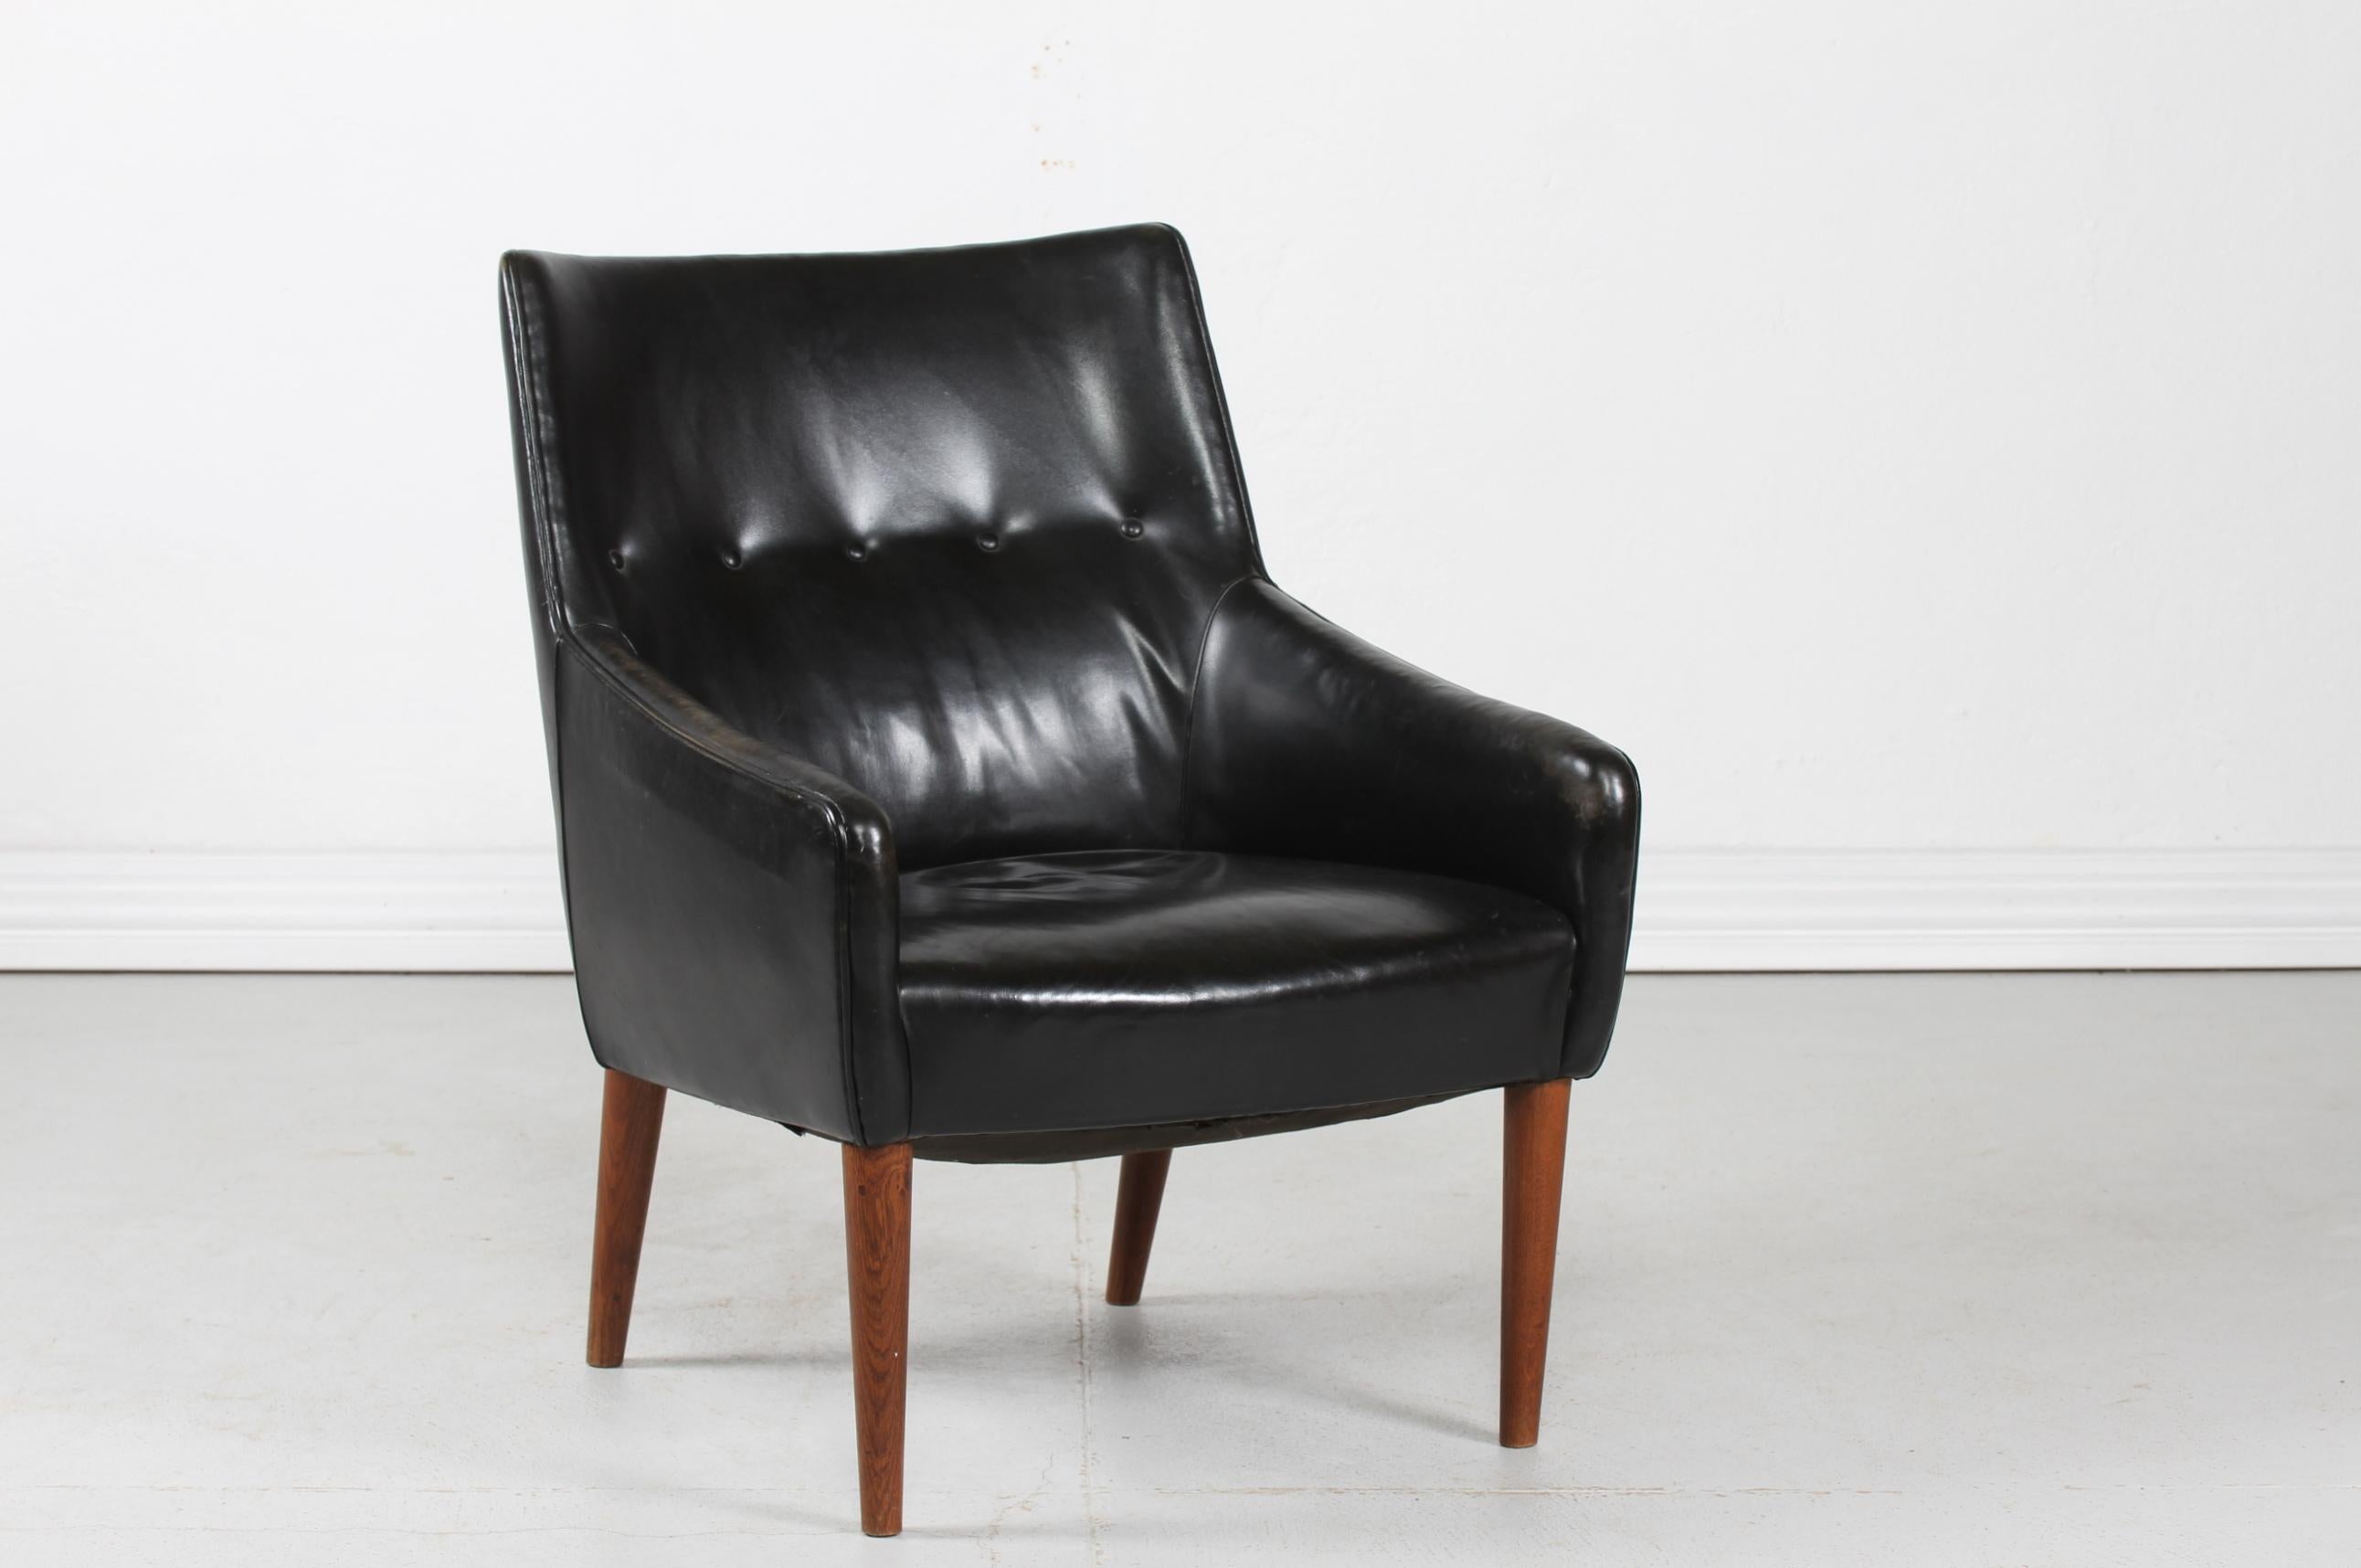 Danish Modern Small Easy Chair with Black Faux Leather by Danish Furniture Maker In Good Condition For Sale In Aarhus C, DK